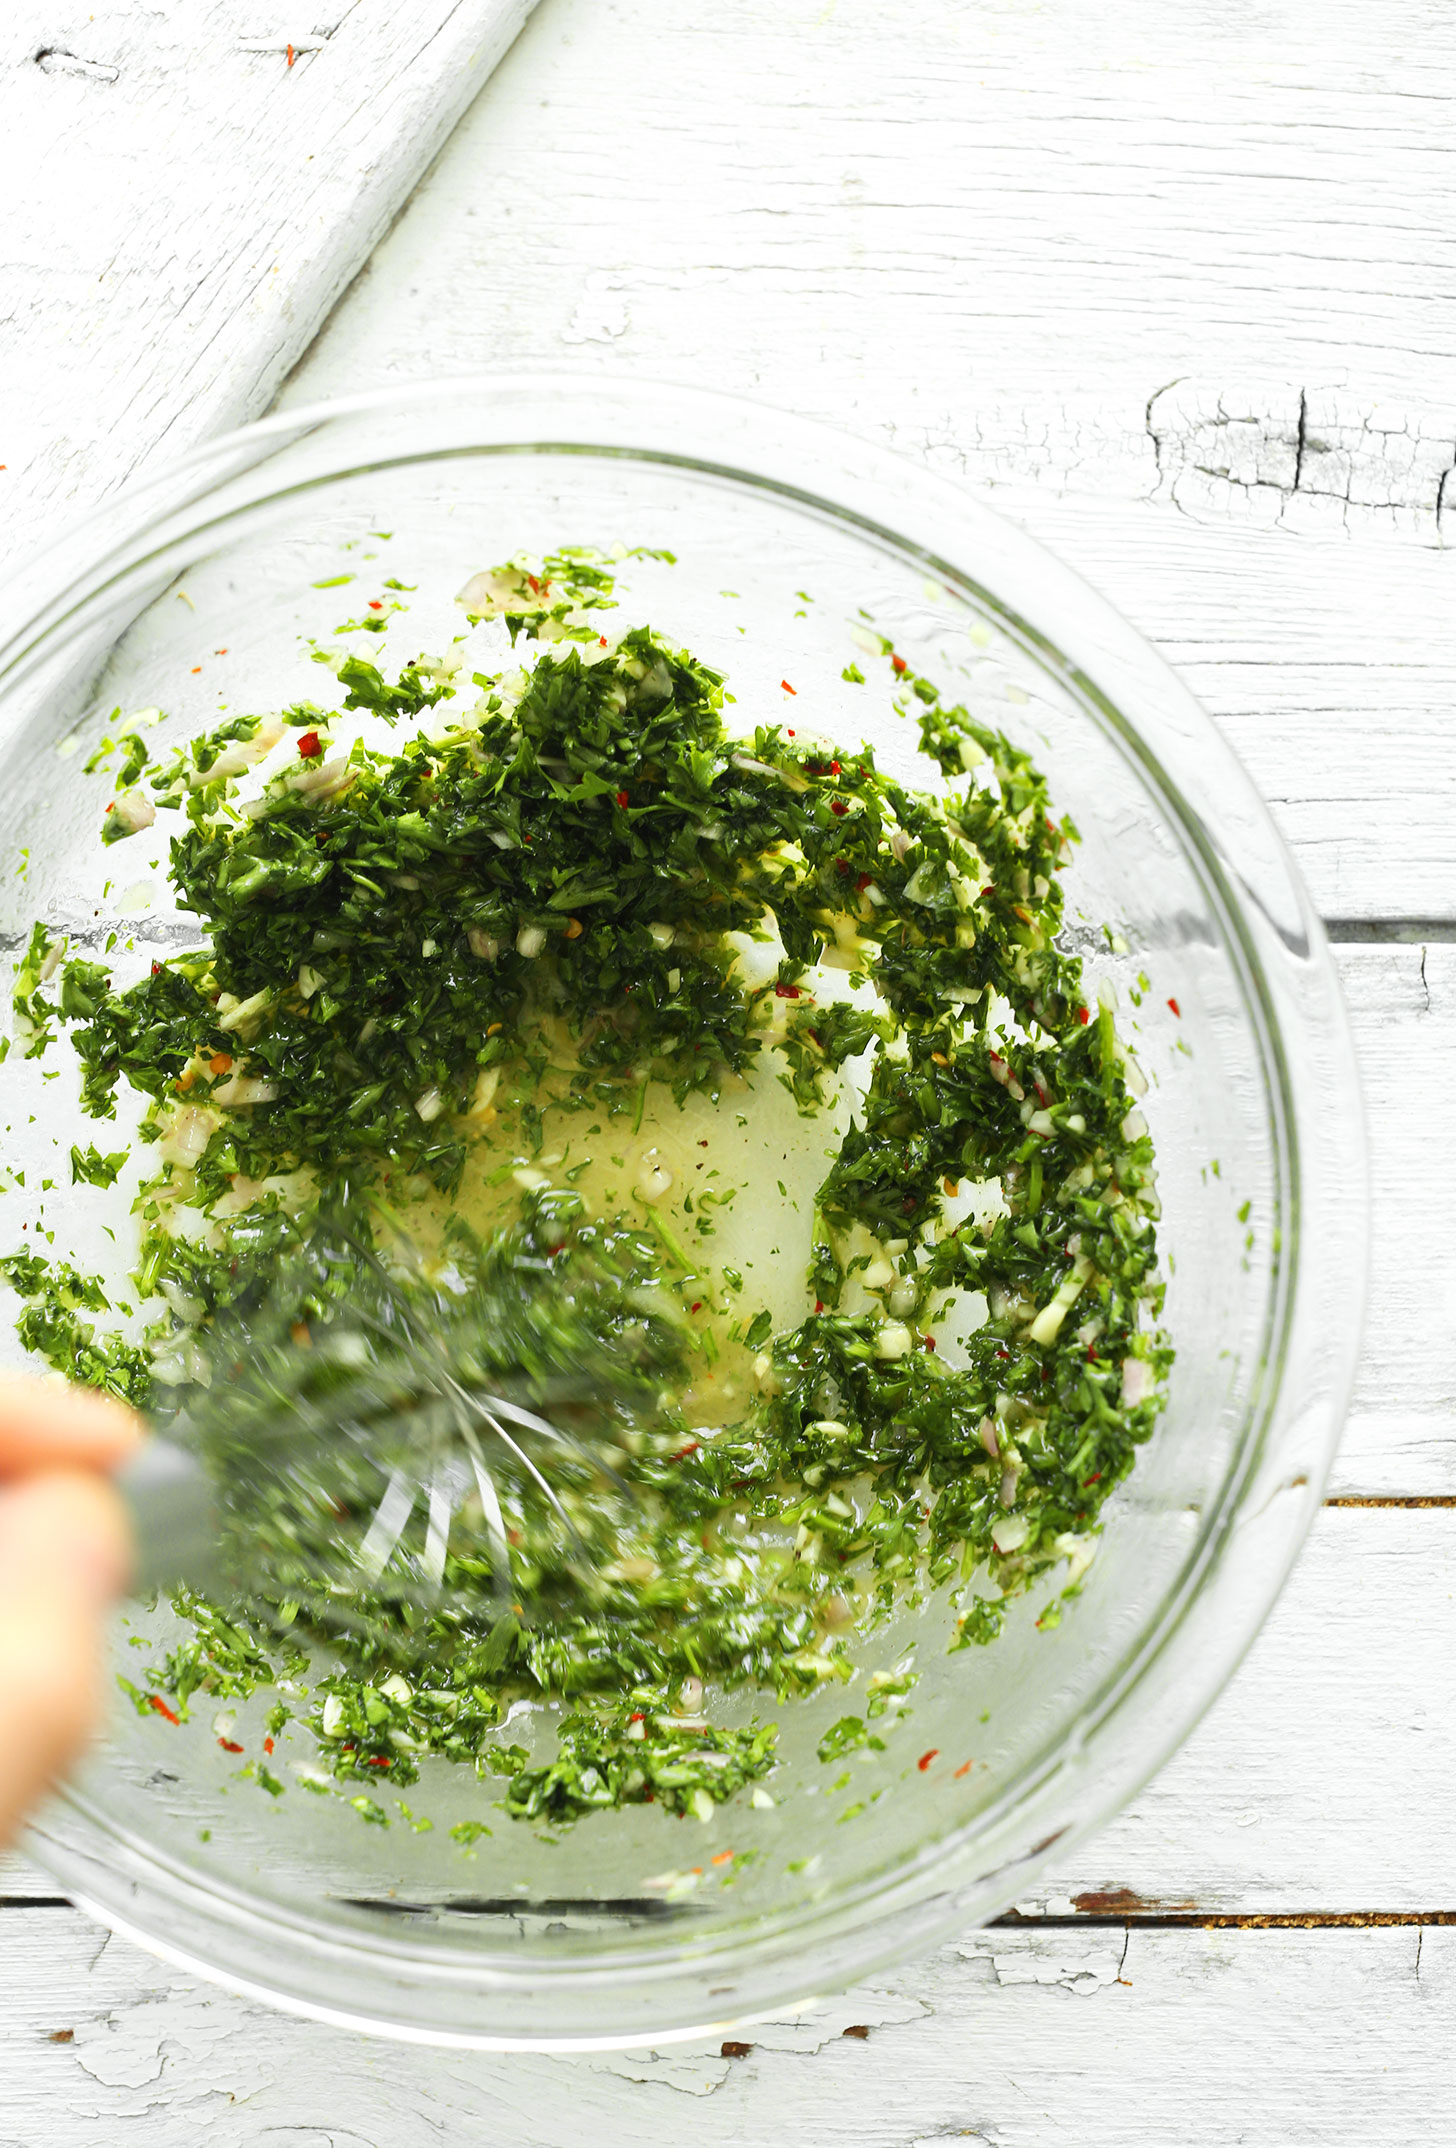 Whisking together ingredients for Avocado Chimichurri